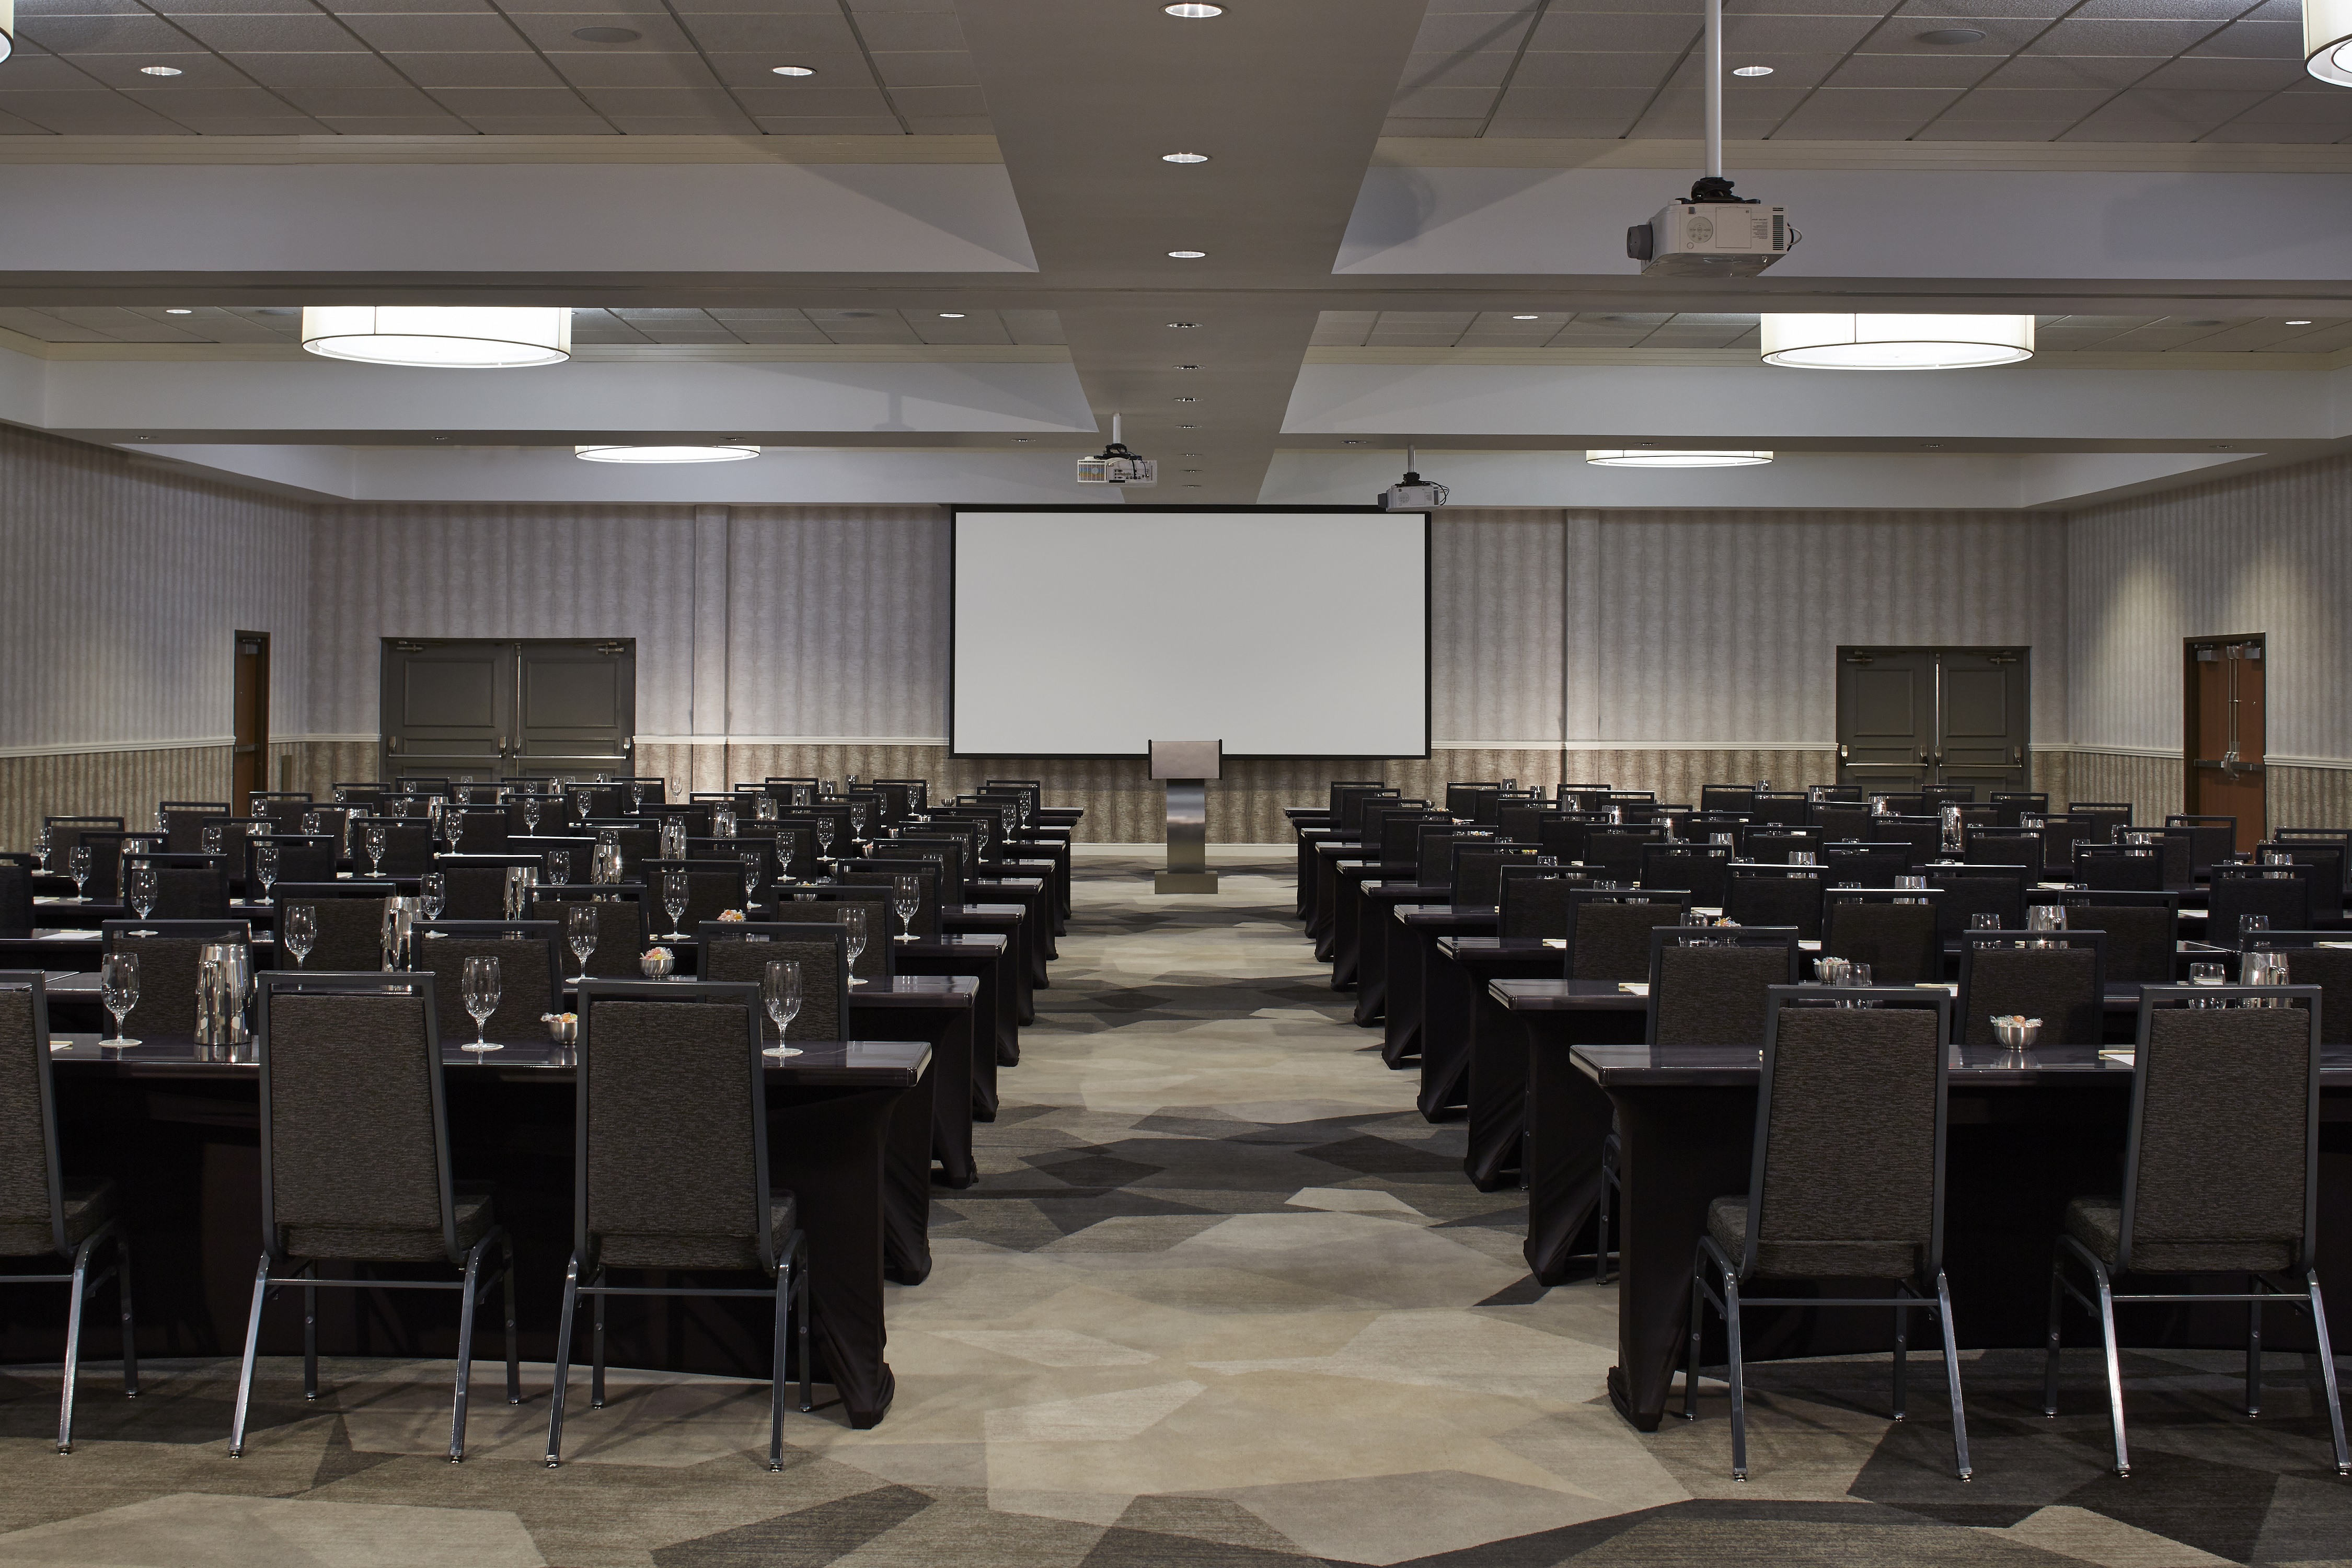 Classroom Setup in Meeting Room With Projector Above Tables and Black Chairs Facing Podium and Presentation Screen